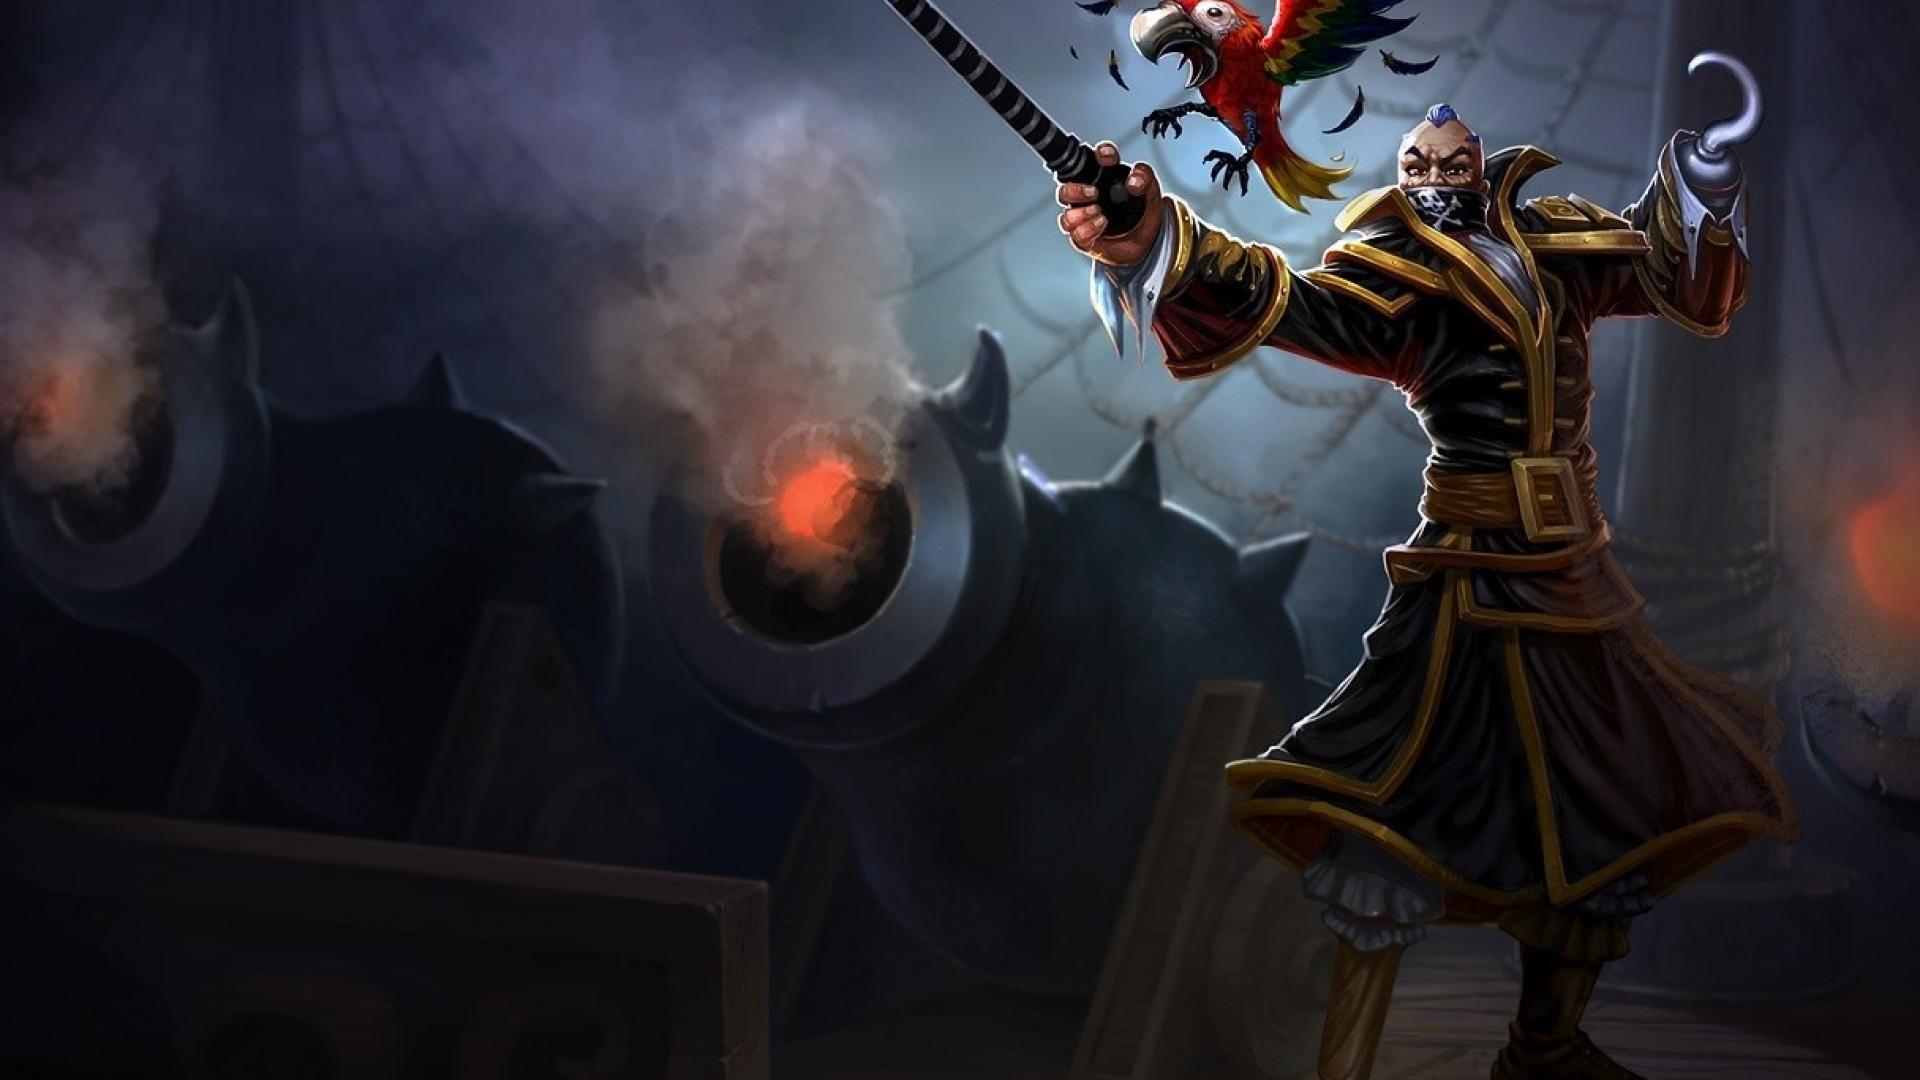 League of legends moba swain game wallpaper